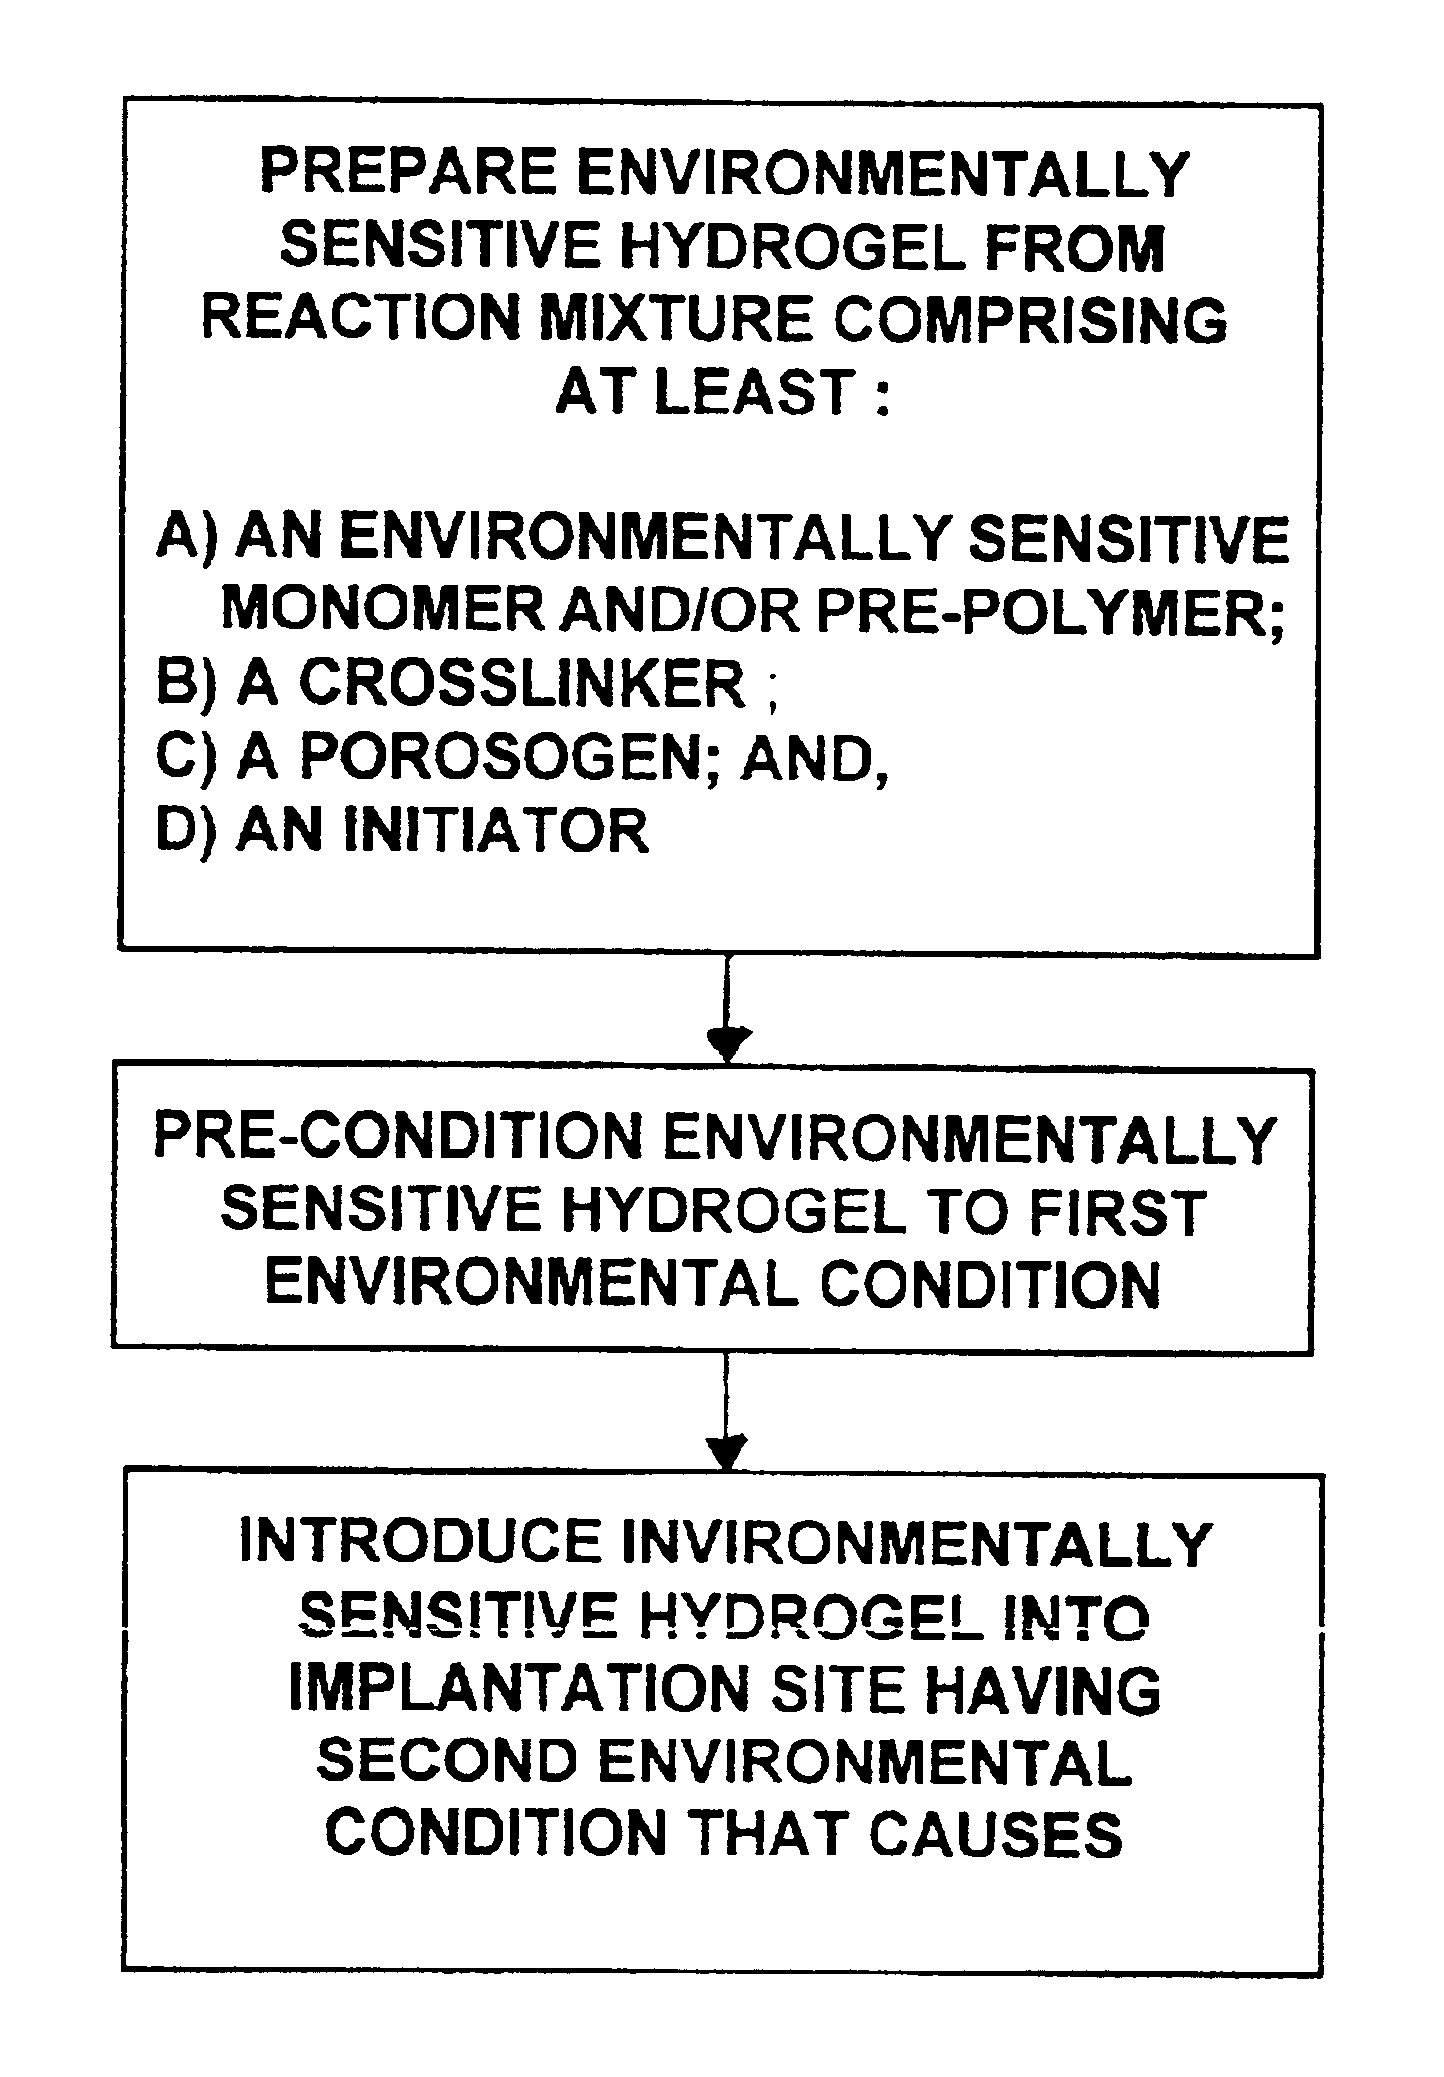 Hydrogels that undergo volumetric expansion in response to changes in their environment and their methods of manufacture and use